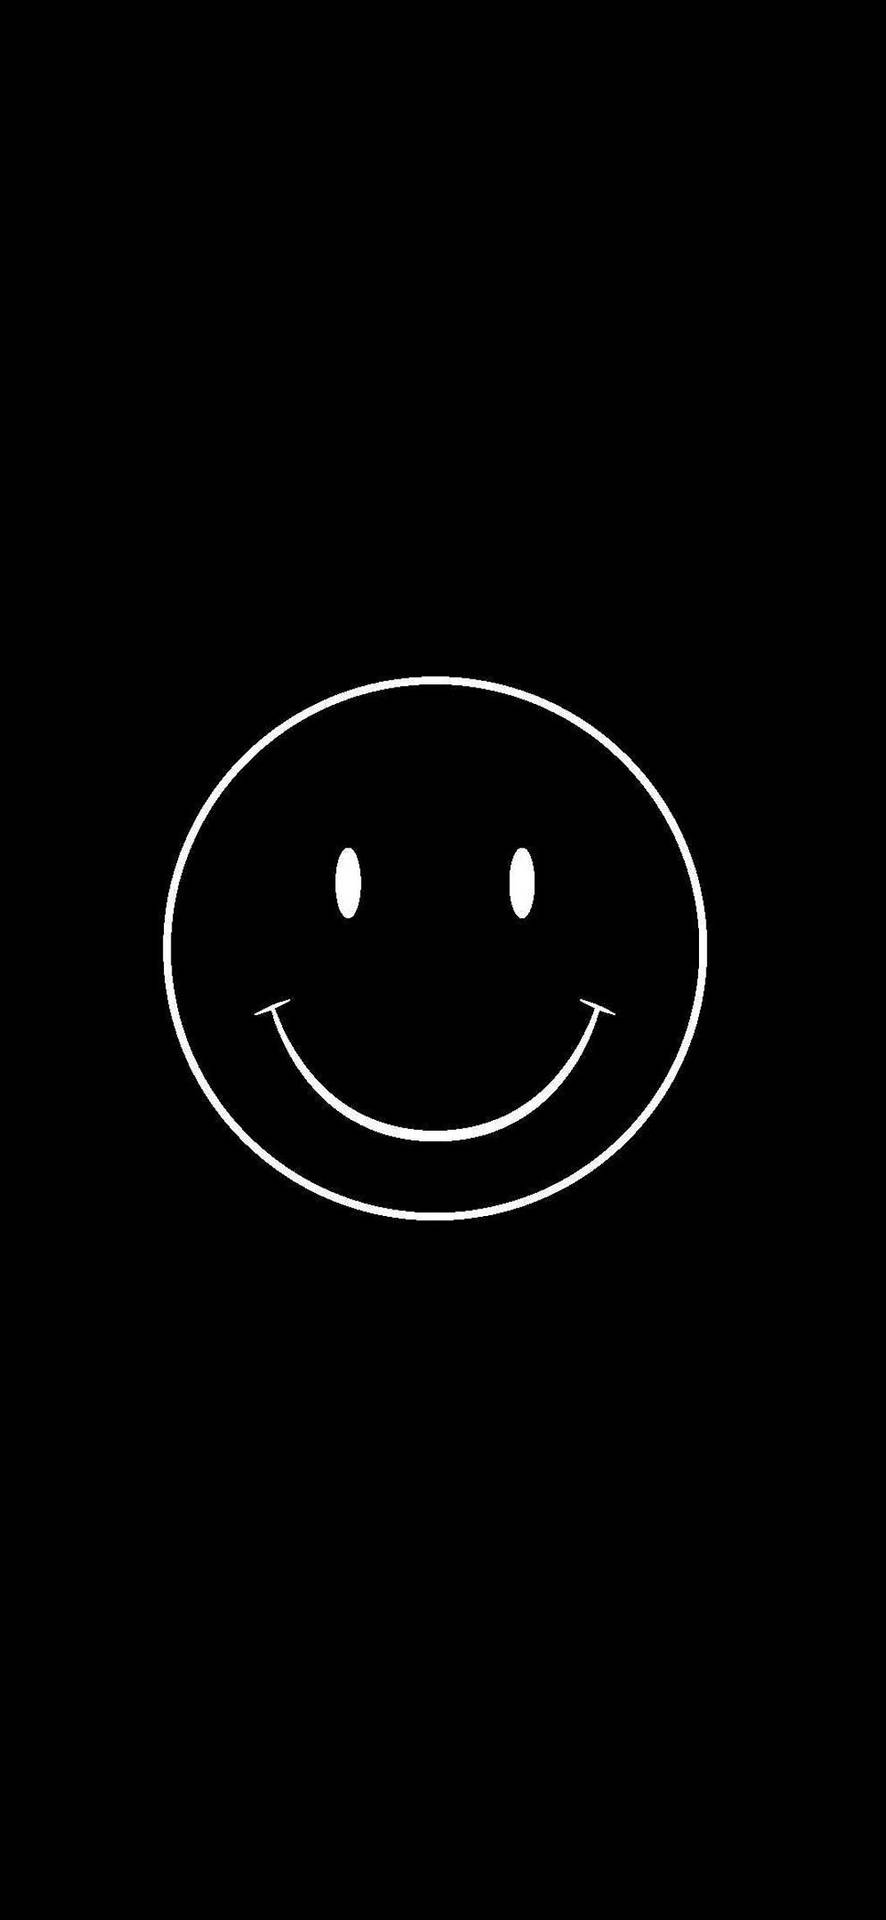 Minimalist Smiley Face In Black Background Background